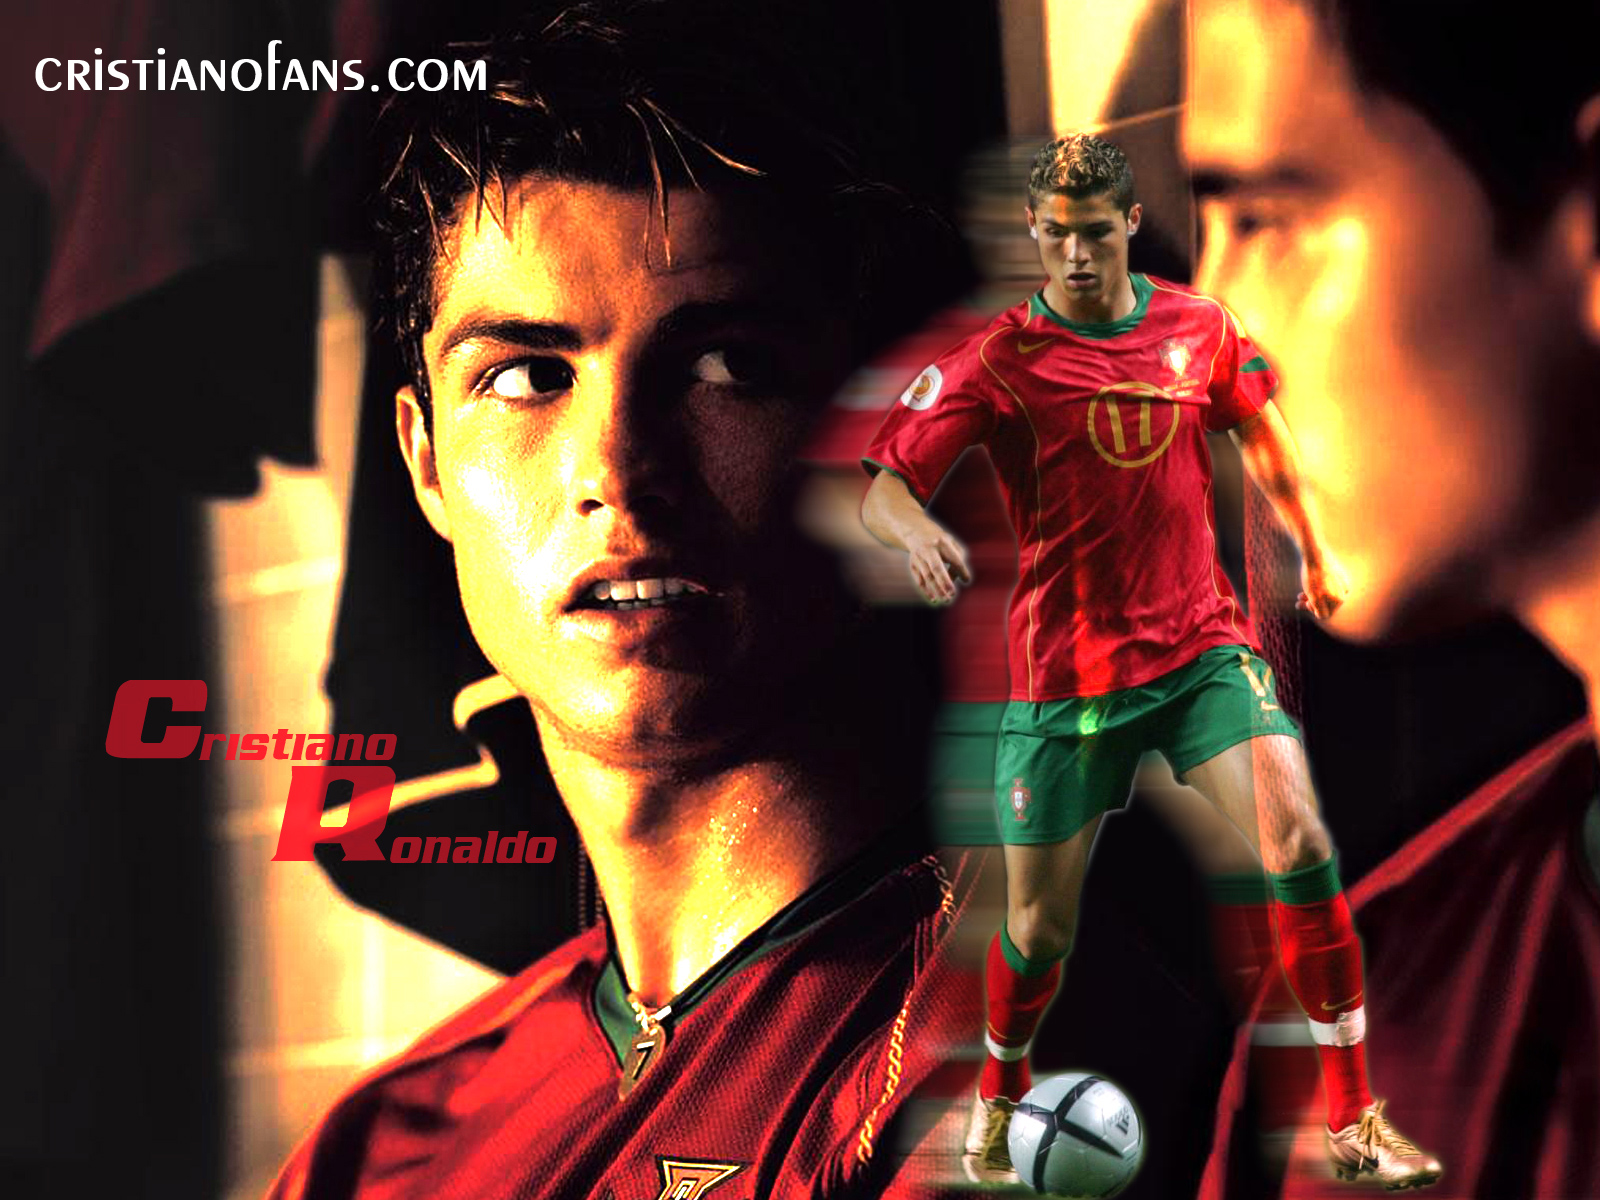 Famous People In The World Cristiano Ronaldo Highest